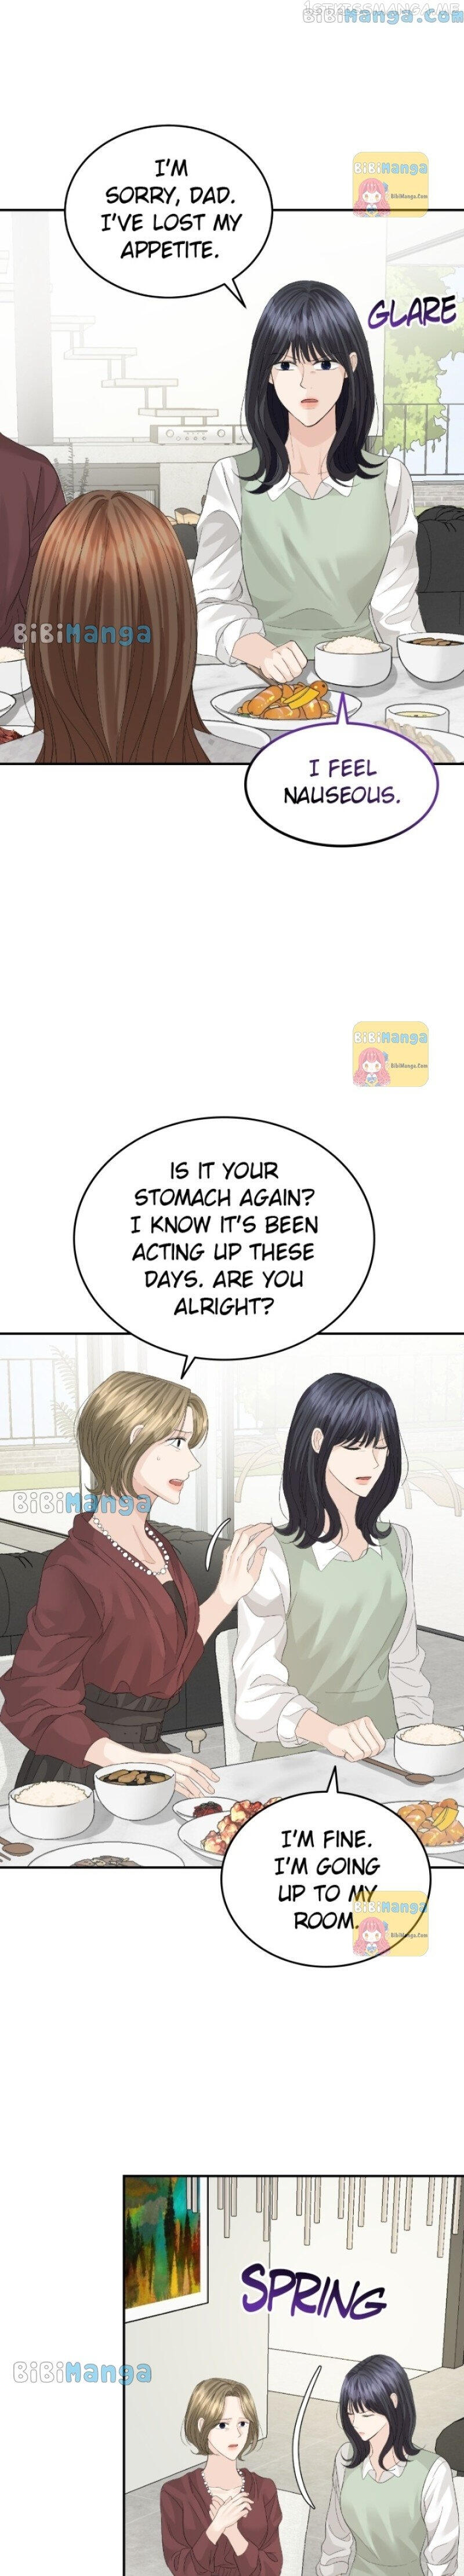 The Essence Of A Perfect Marriage Chapter 81 page 13 - Mangakakalot